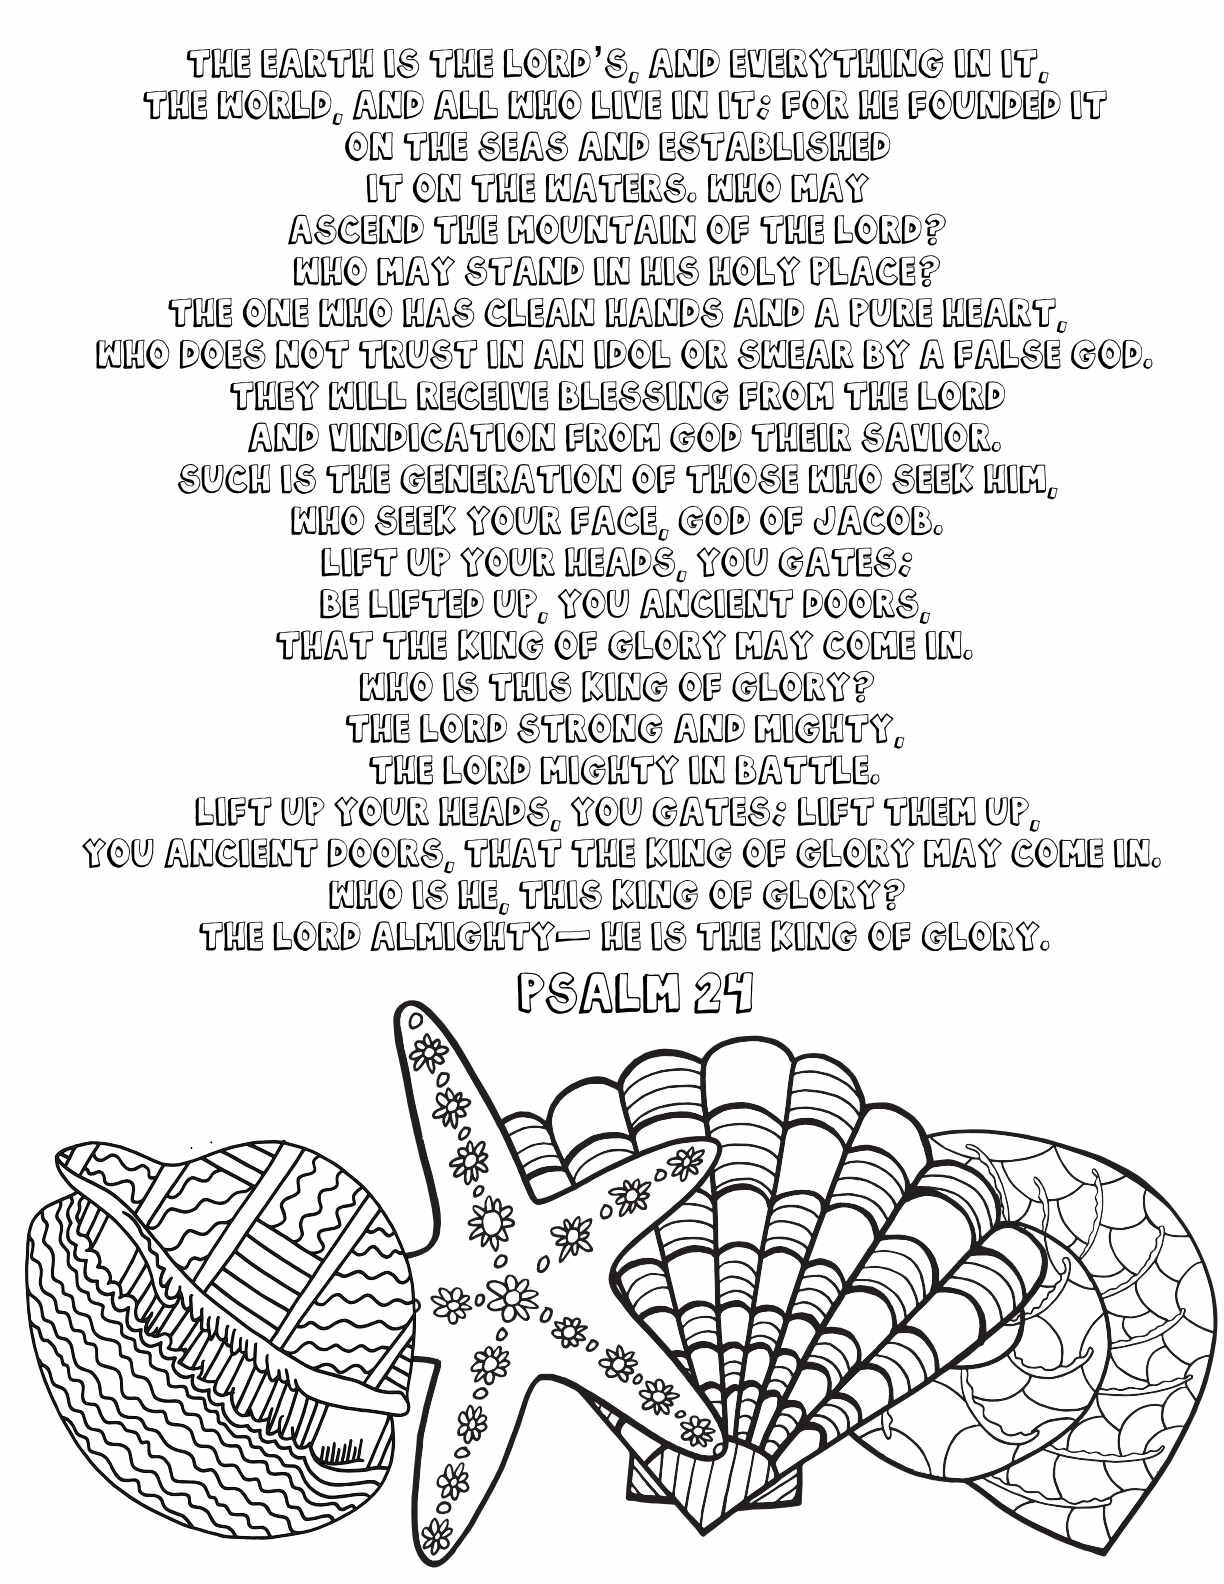 10 Free Printable Psalm Coloring Pages - Download and Color Adult Scripture - Psalm 24CLICK HERE TO DOWNLOAD THIS PAGE FREE